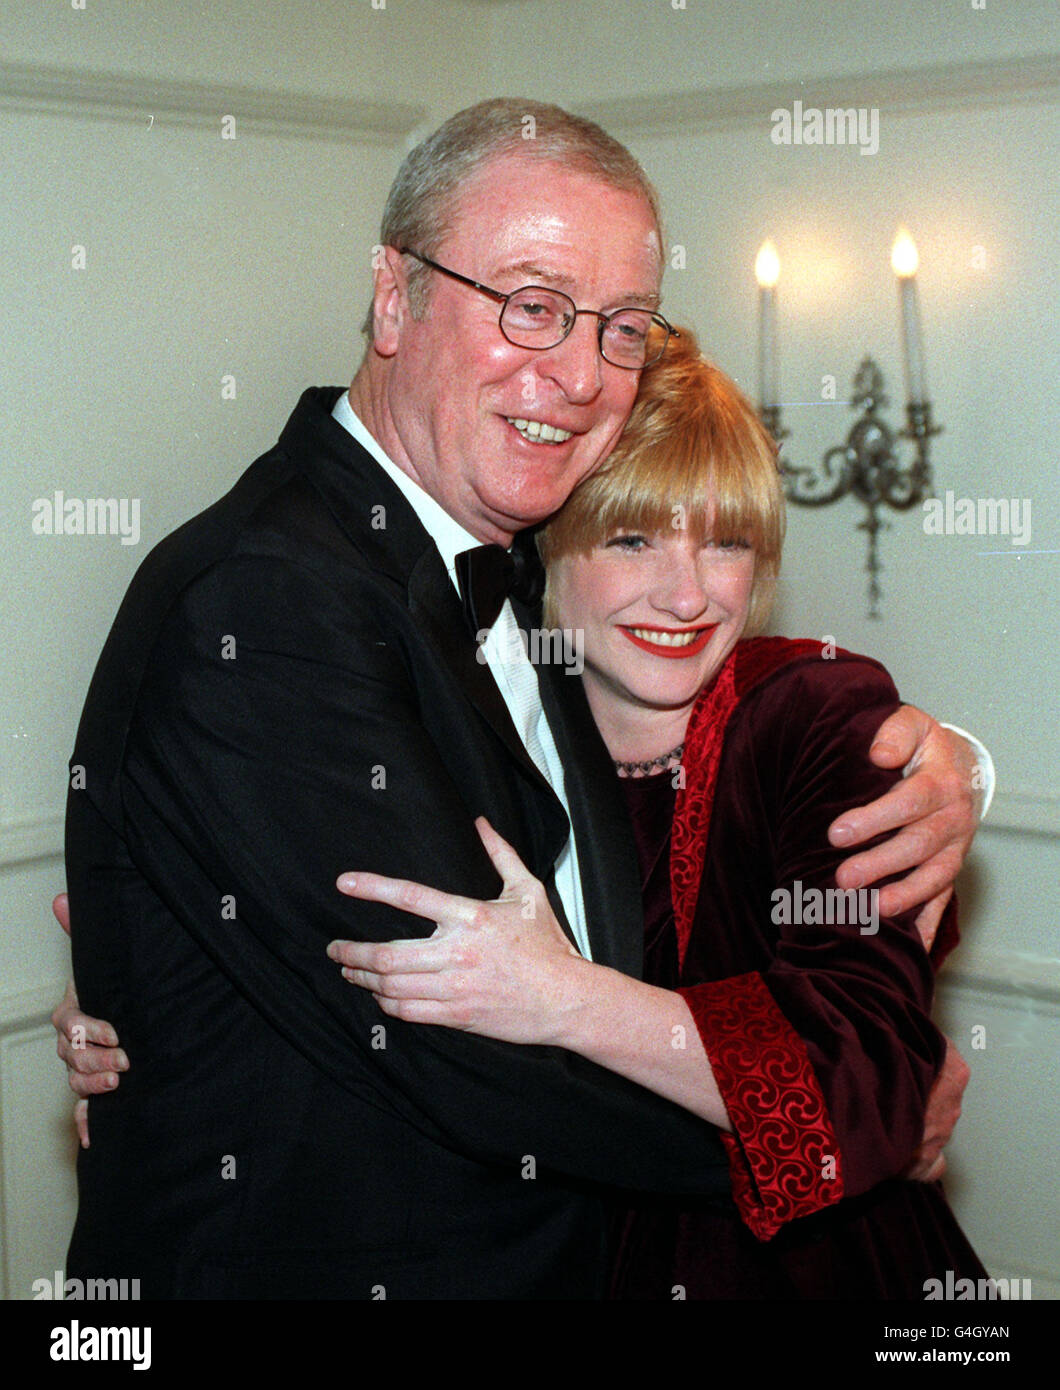 Two of the stars of 'Little Voice' Michael Caine and Jane Horrocks arrive at the Savoy hotel in London for Evening Standard British Film Awards for 1998. Stock Photo